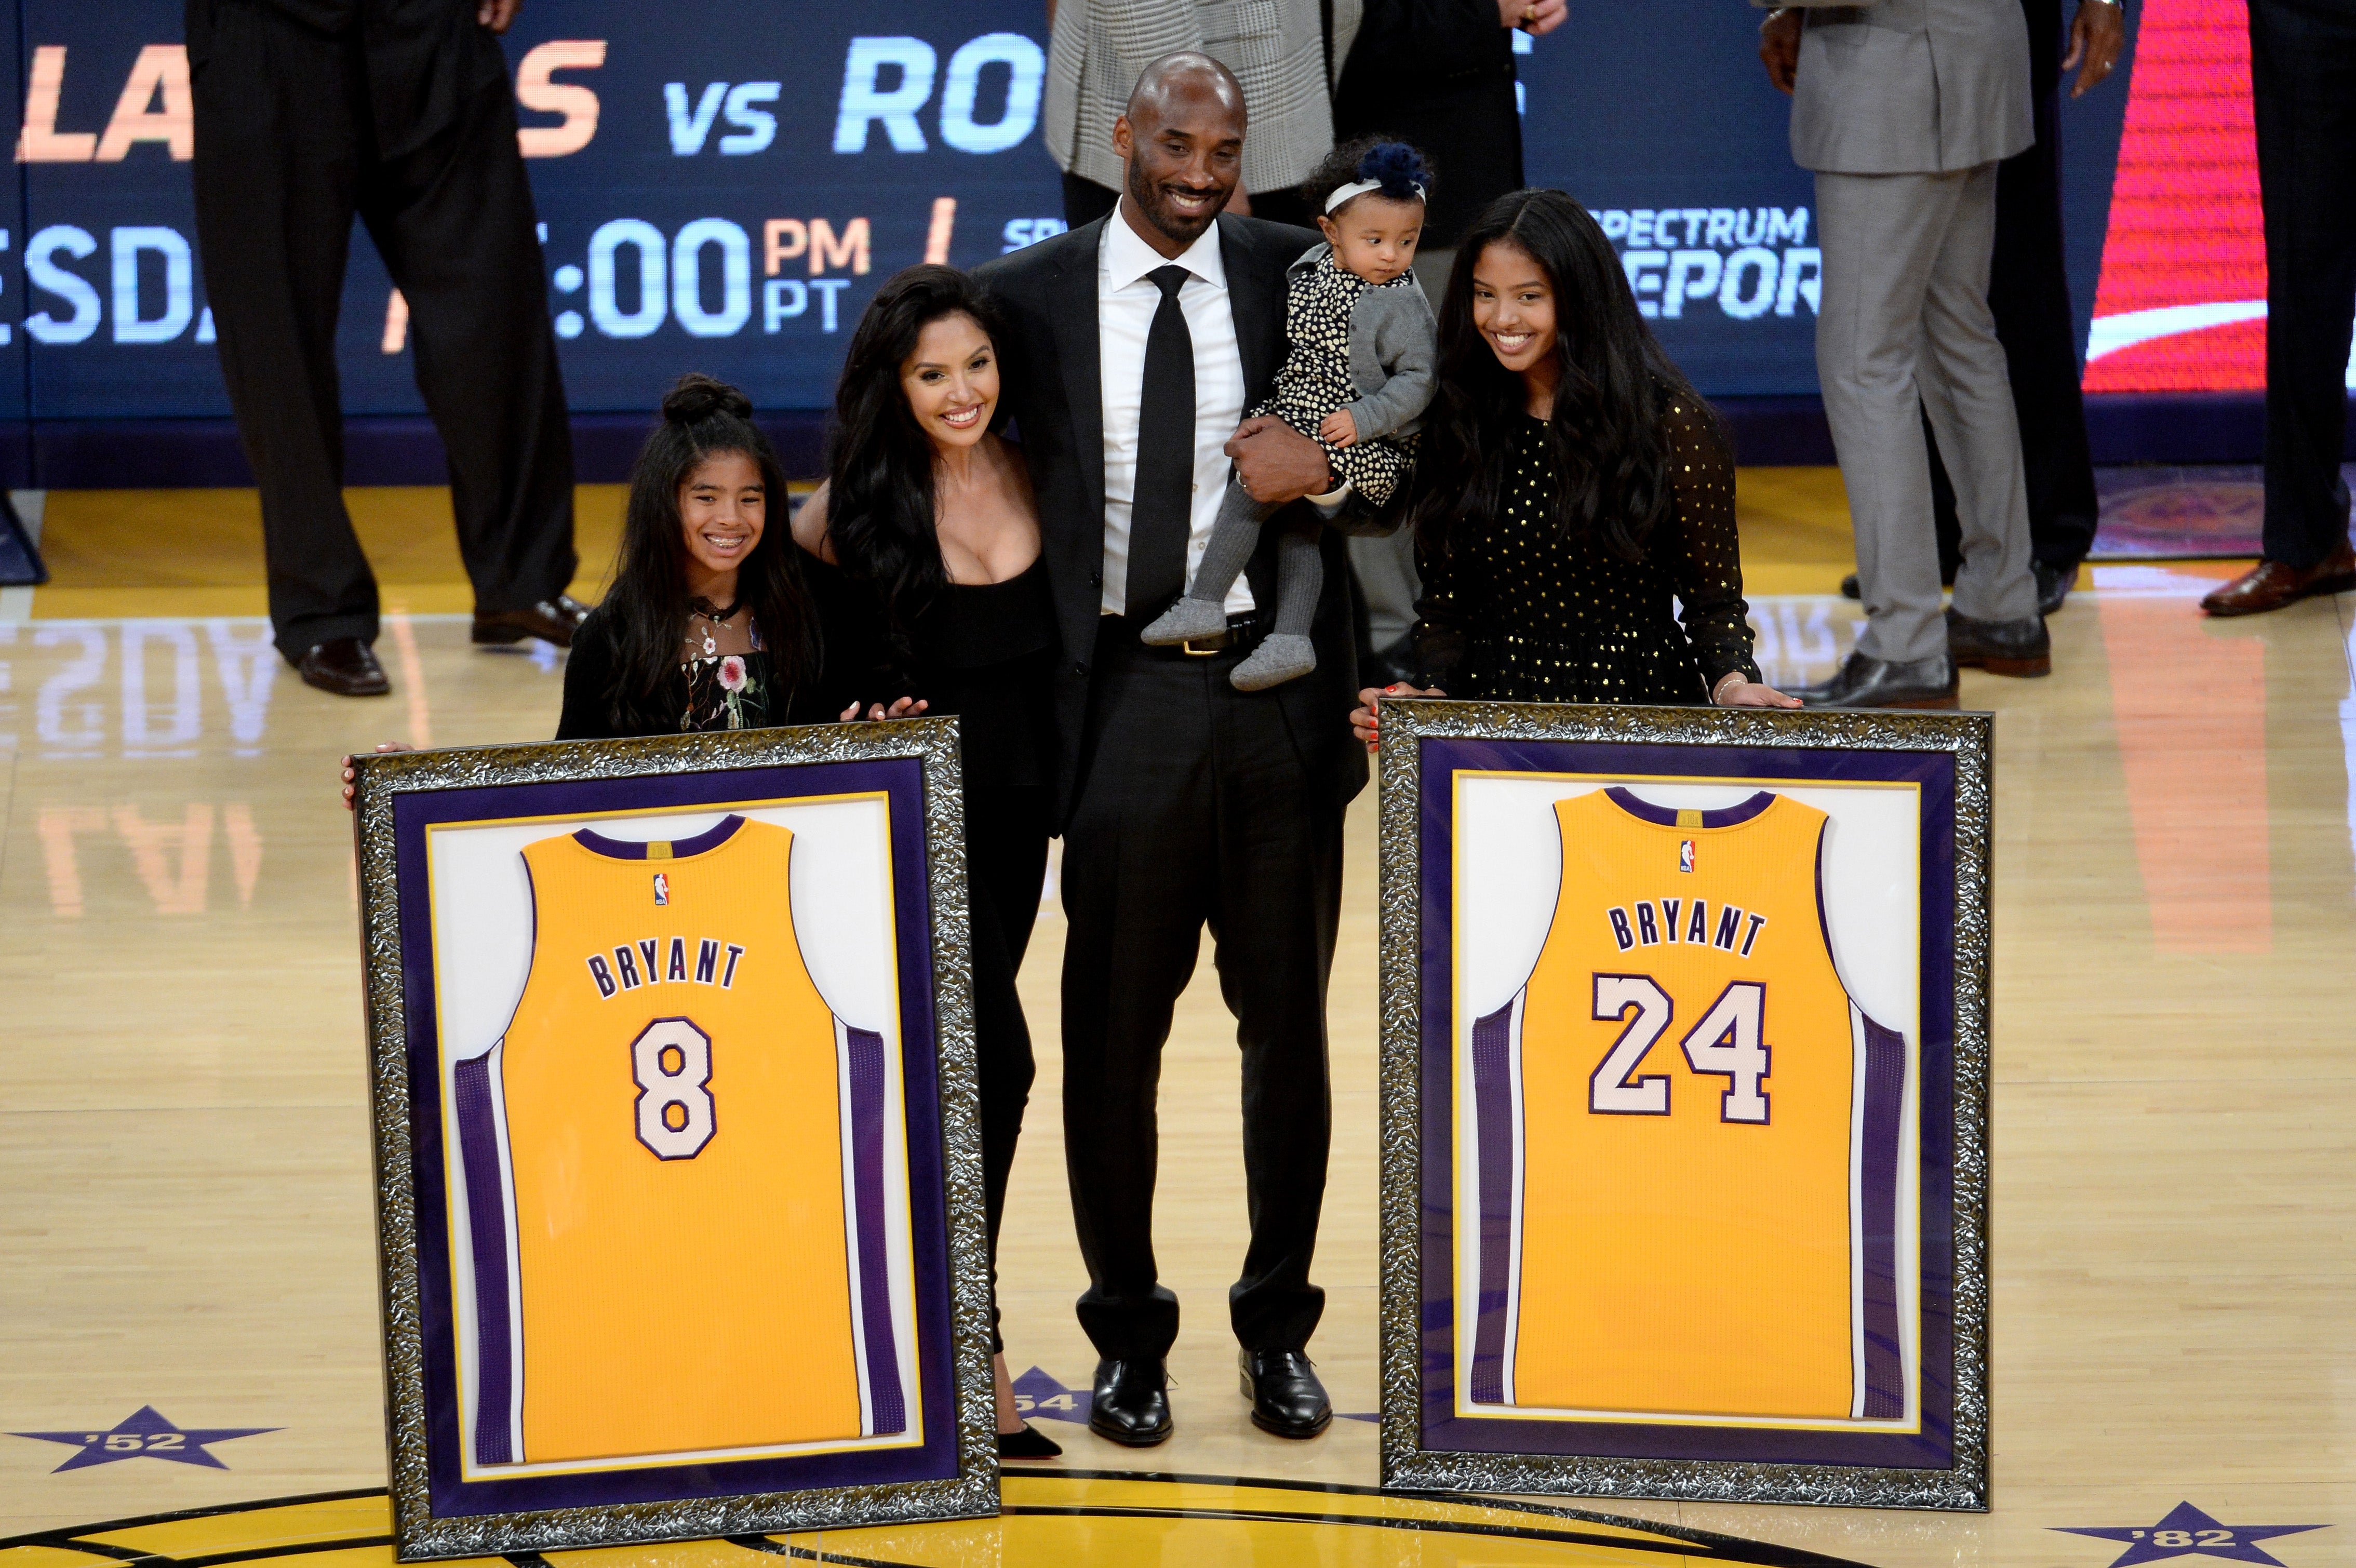 A Look At Kobe Bryant's Inspirational Life And History-Making Career In Photos